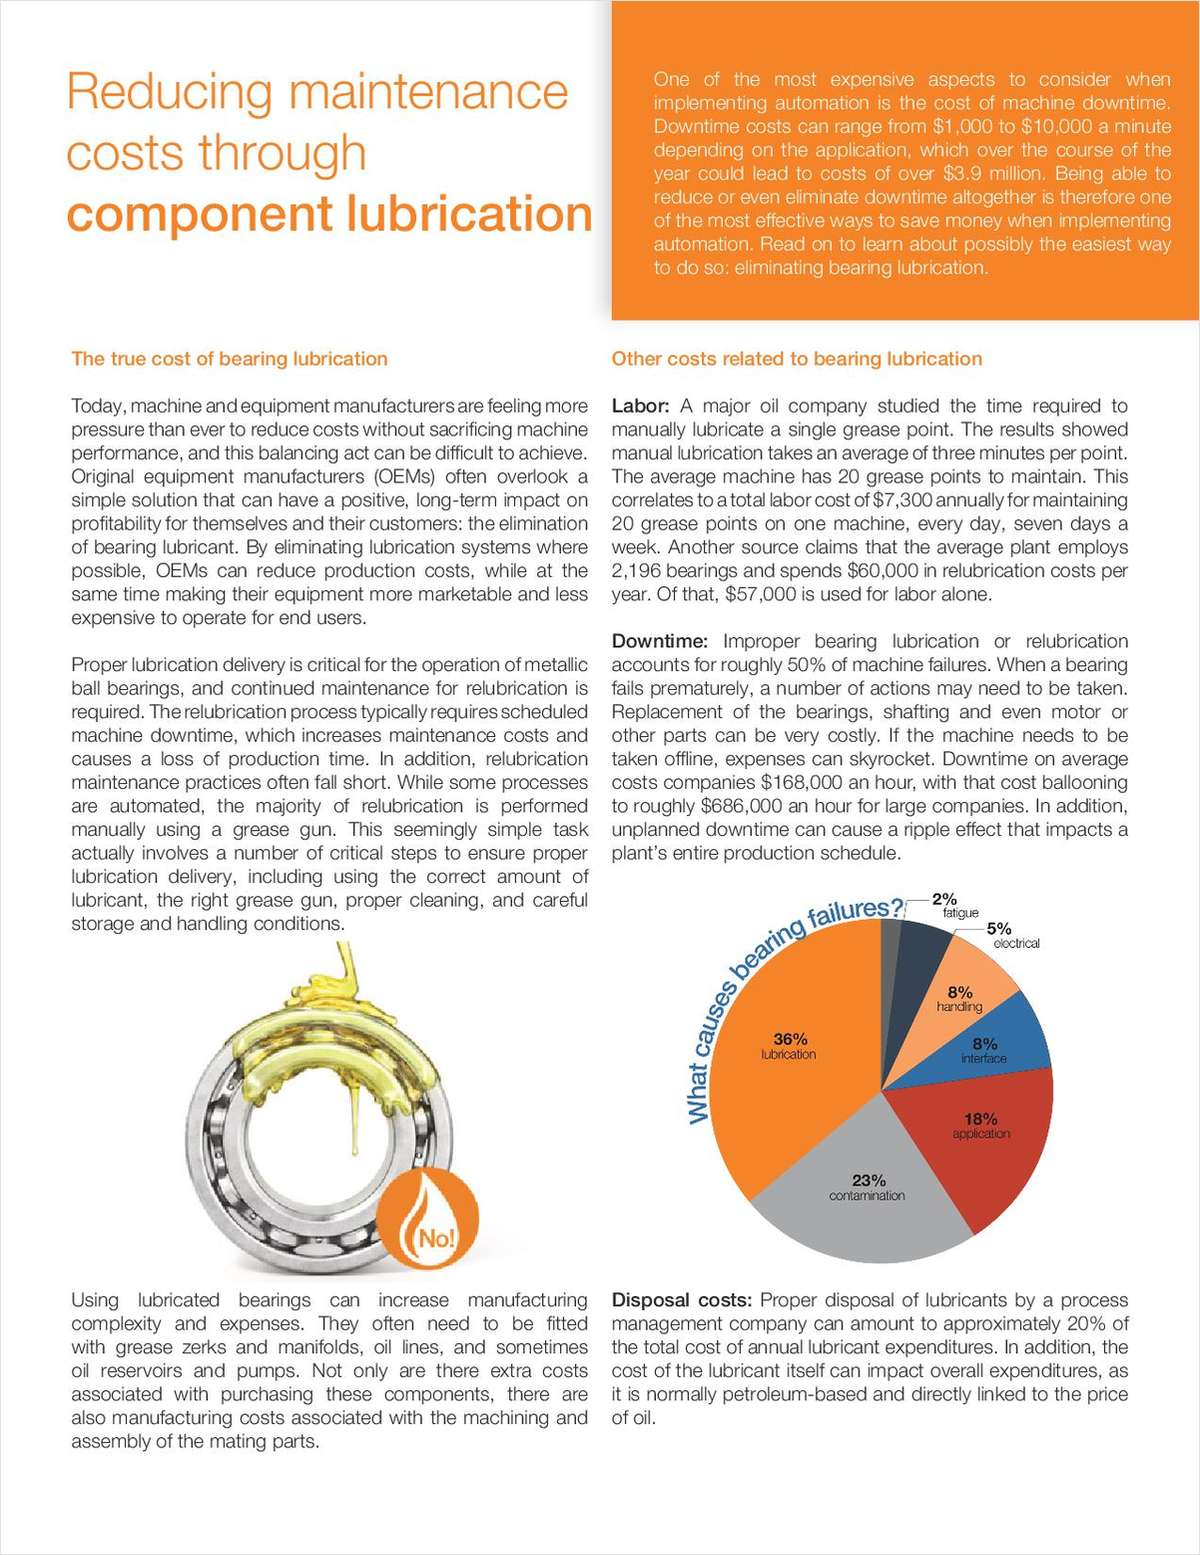 Reducing maintenance costs through component lubrication